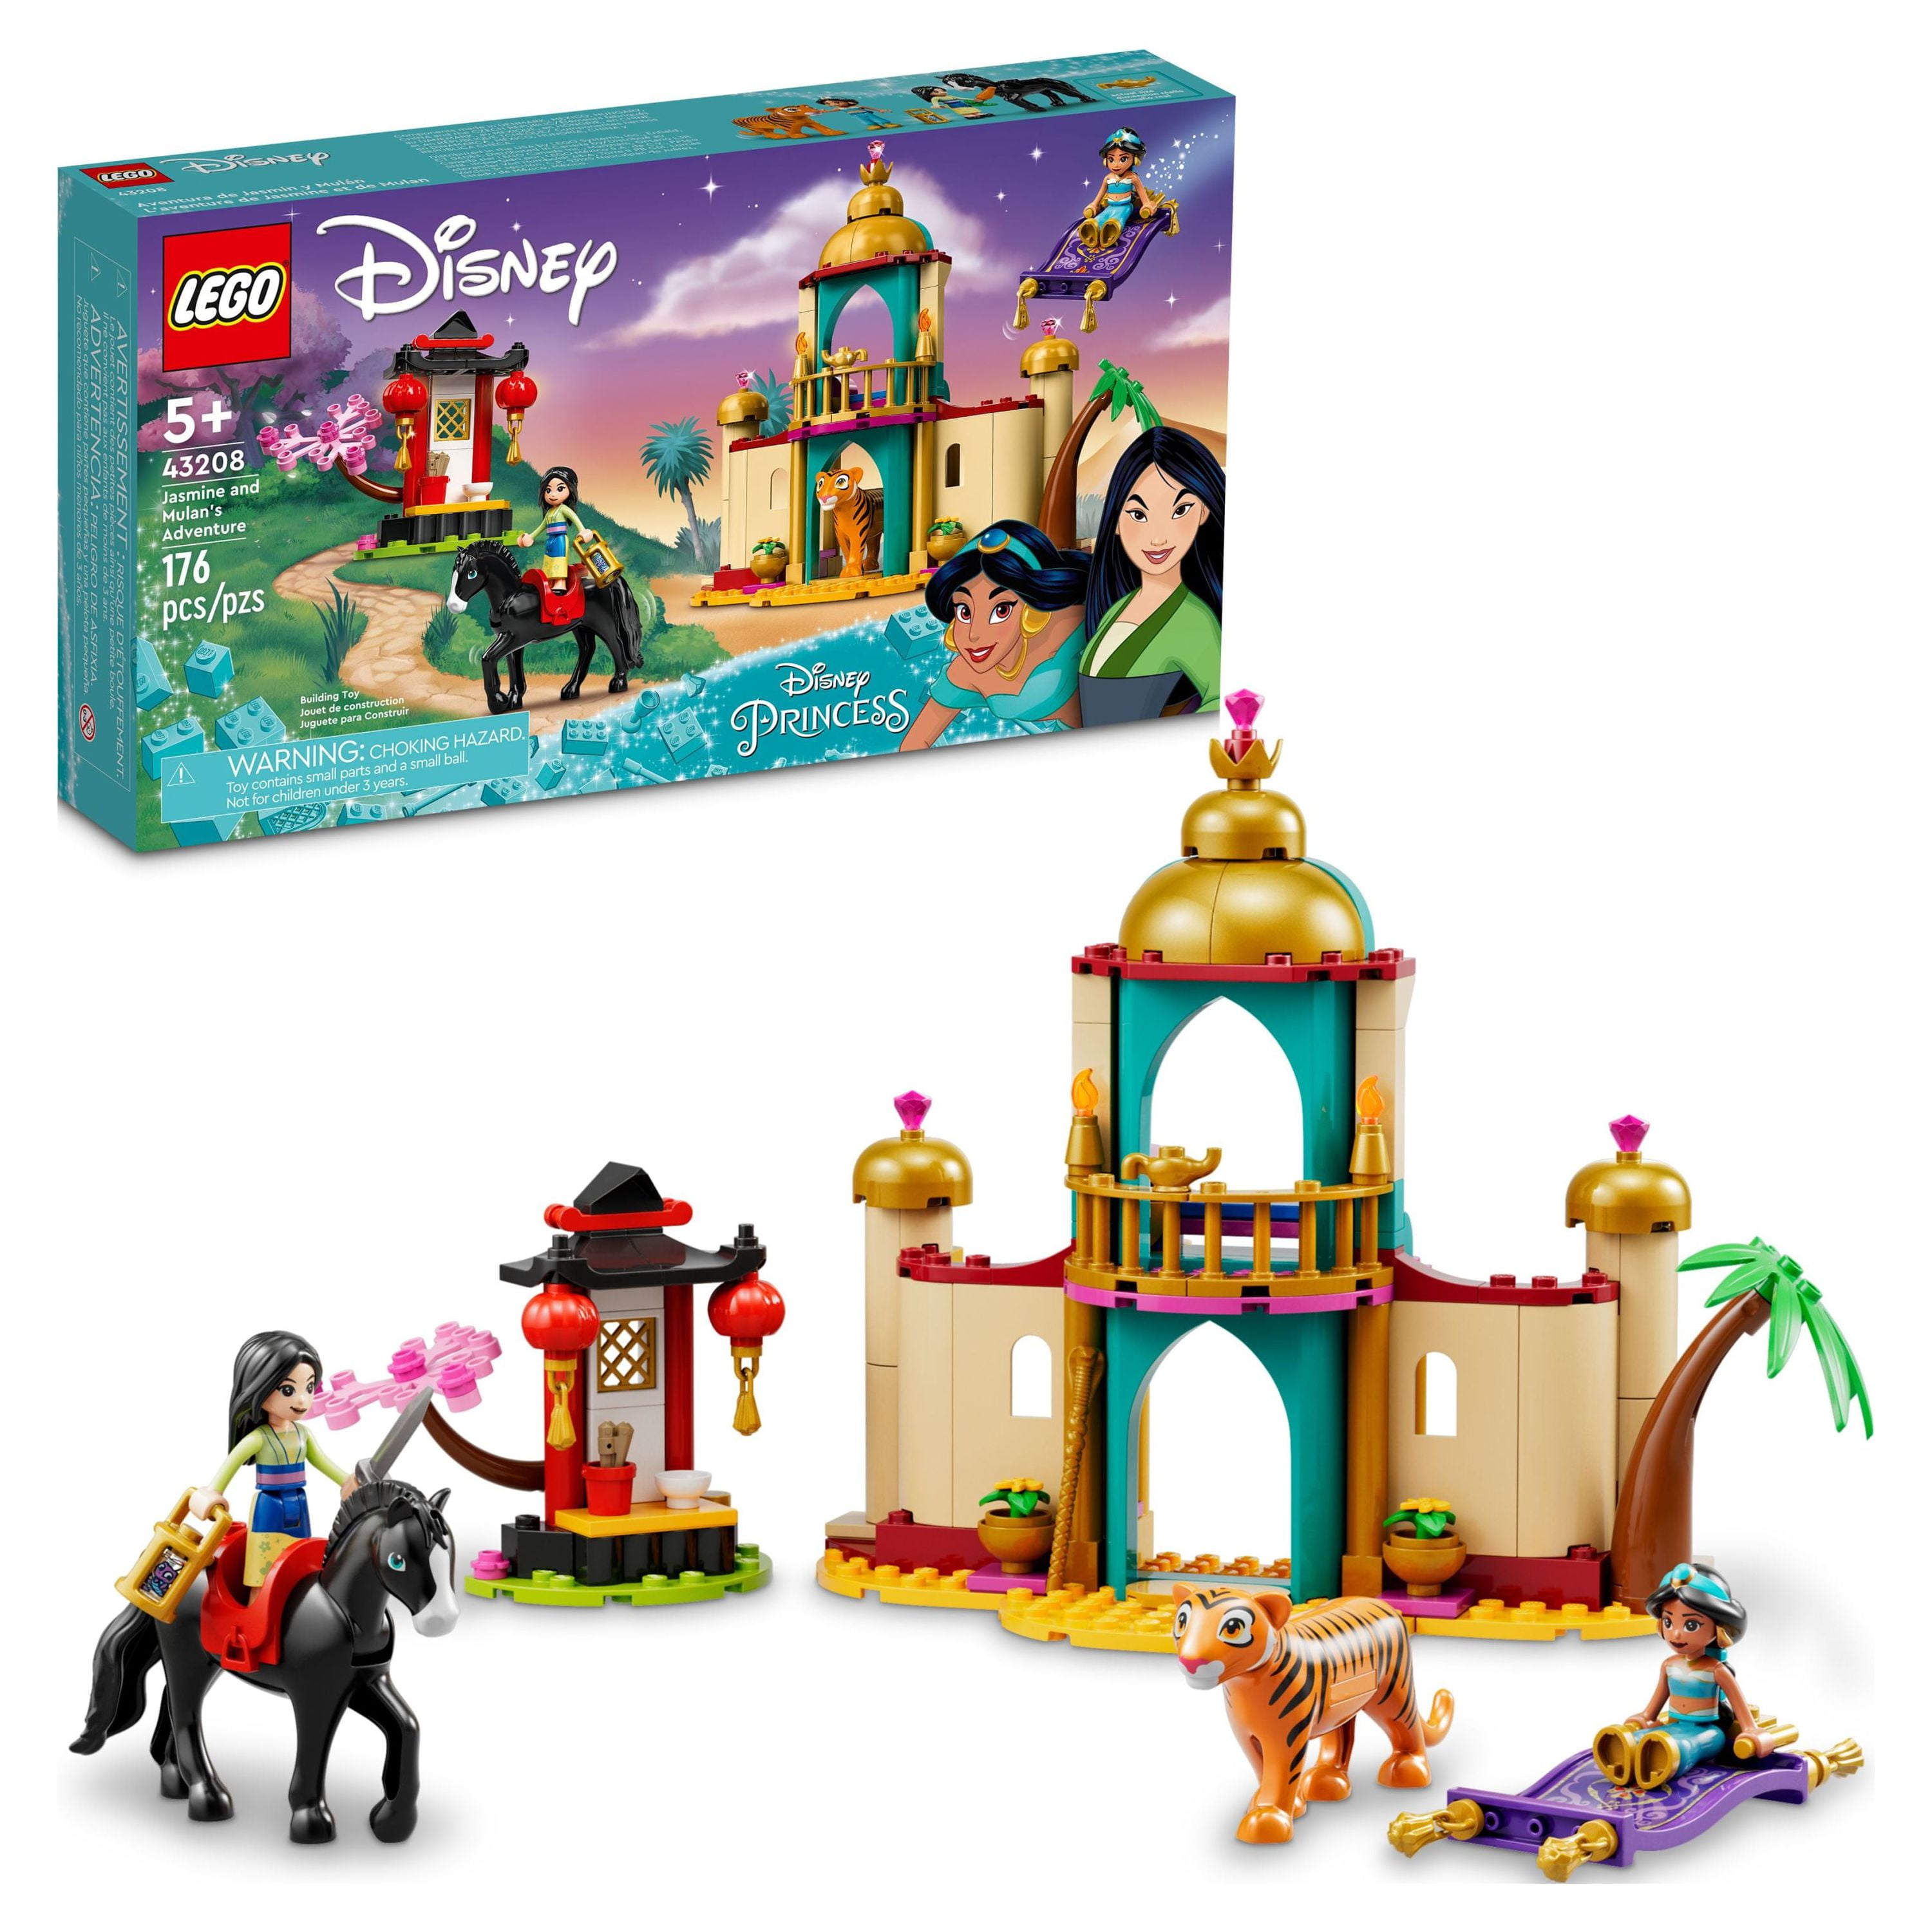 LEGO Disney Princess Jasmine and Mulan’s Adventure 43208 Palace Set,  Aladdin &amp; Mulan Buildable Toy with Horse and Tiger Figures, Gifts for Kids, Girls &amp; Boys - Walmart.com